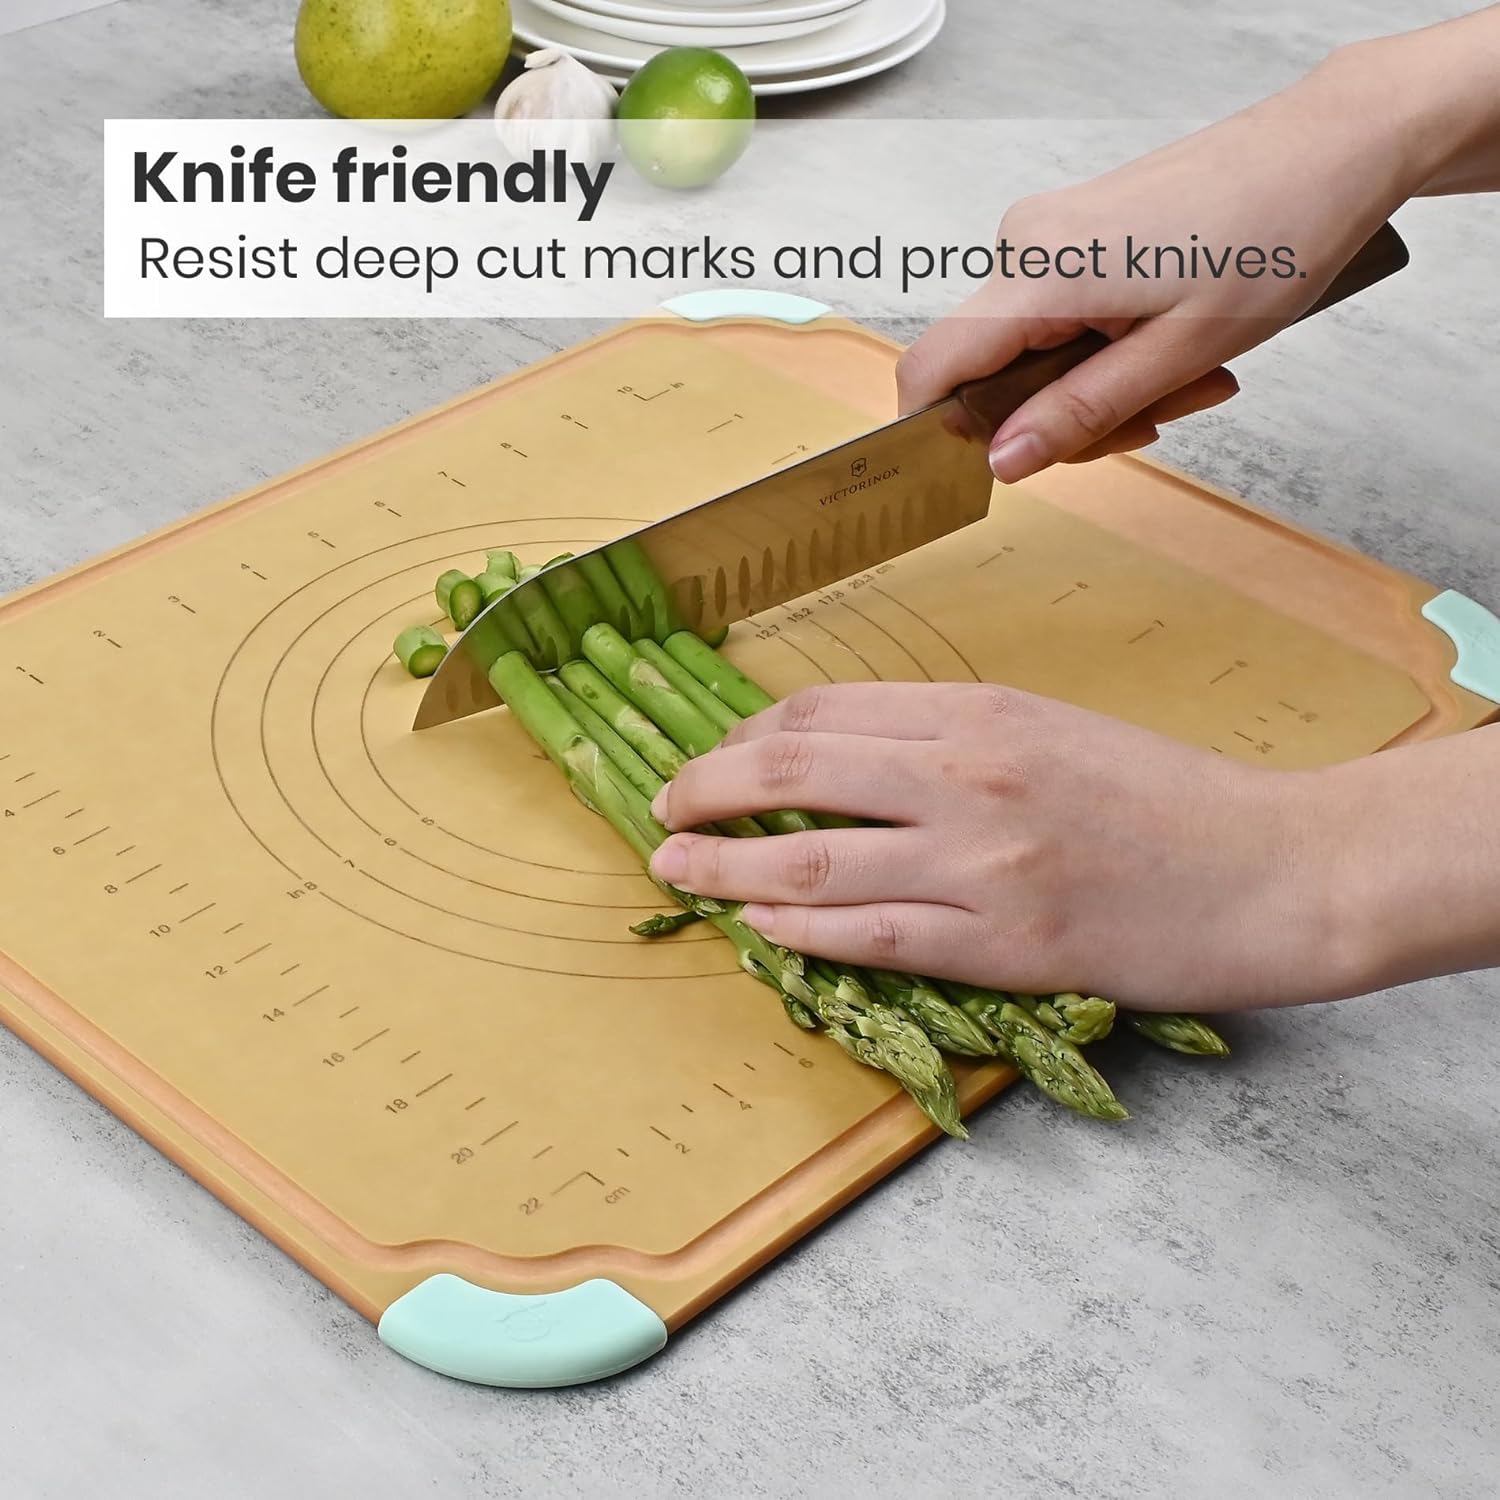 VAL CUCINA VAL BOARD Cutting Board for Air FryerToaster Oven - Compatible with TA25G Series Air Fryer Oven, Accessories for Countertop Convection Toaster Oven, Creates Storage Space, Protects Cabinets, Green Color